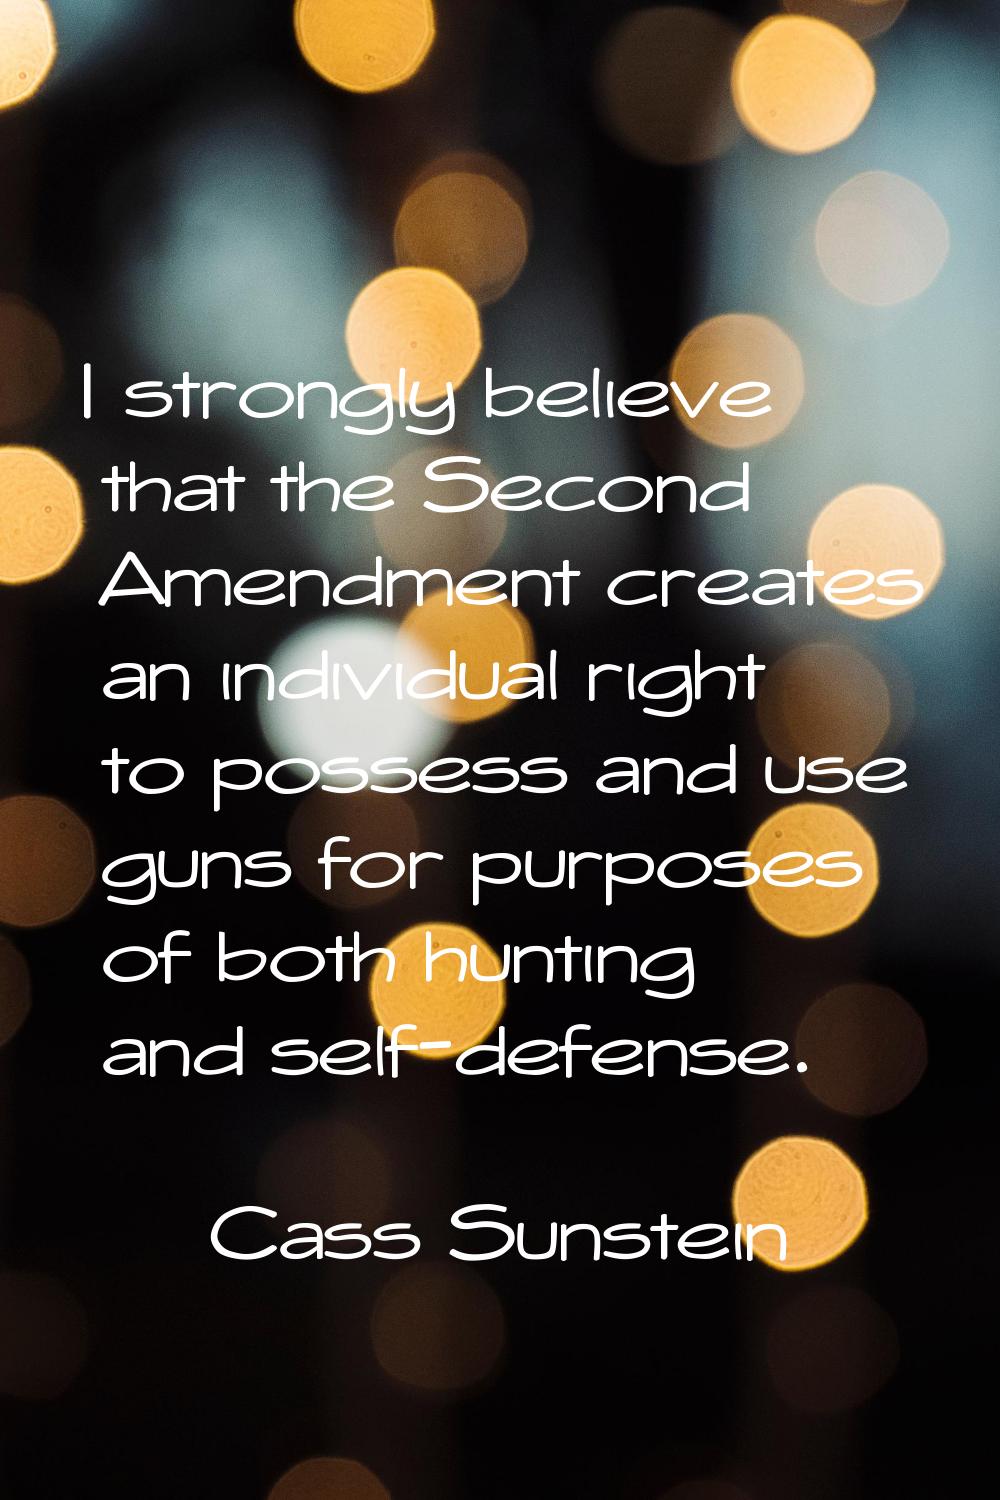 I strongly believe that the Second Amendment creates an individual right to possess and use guns fo